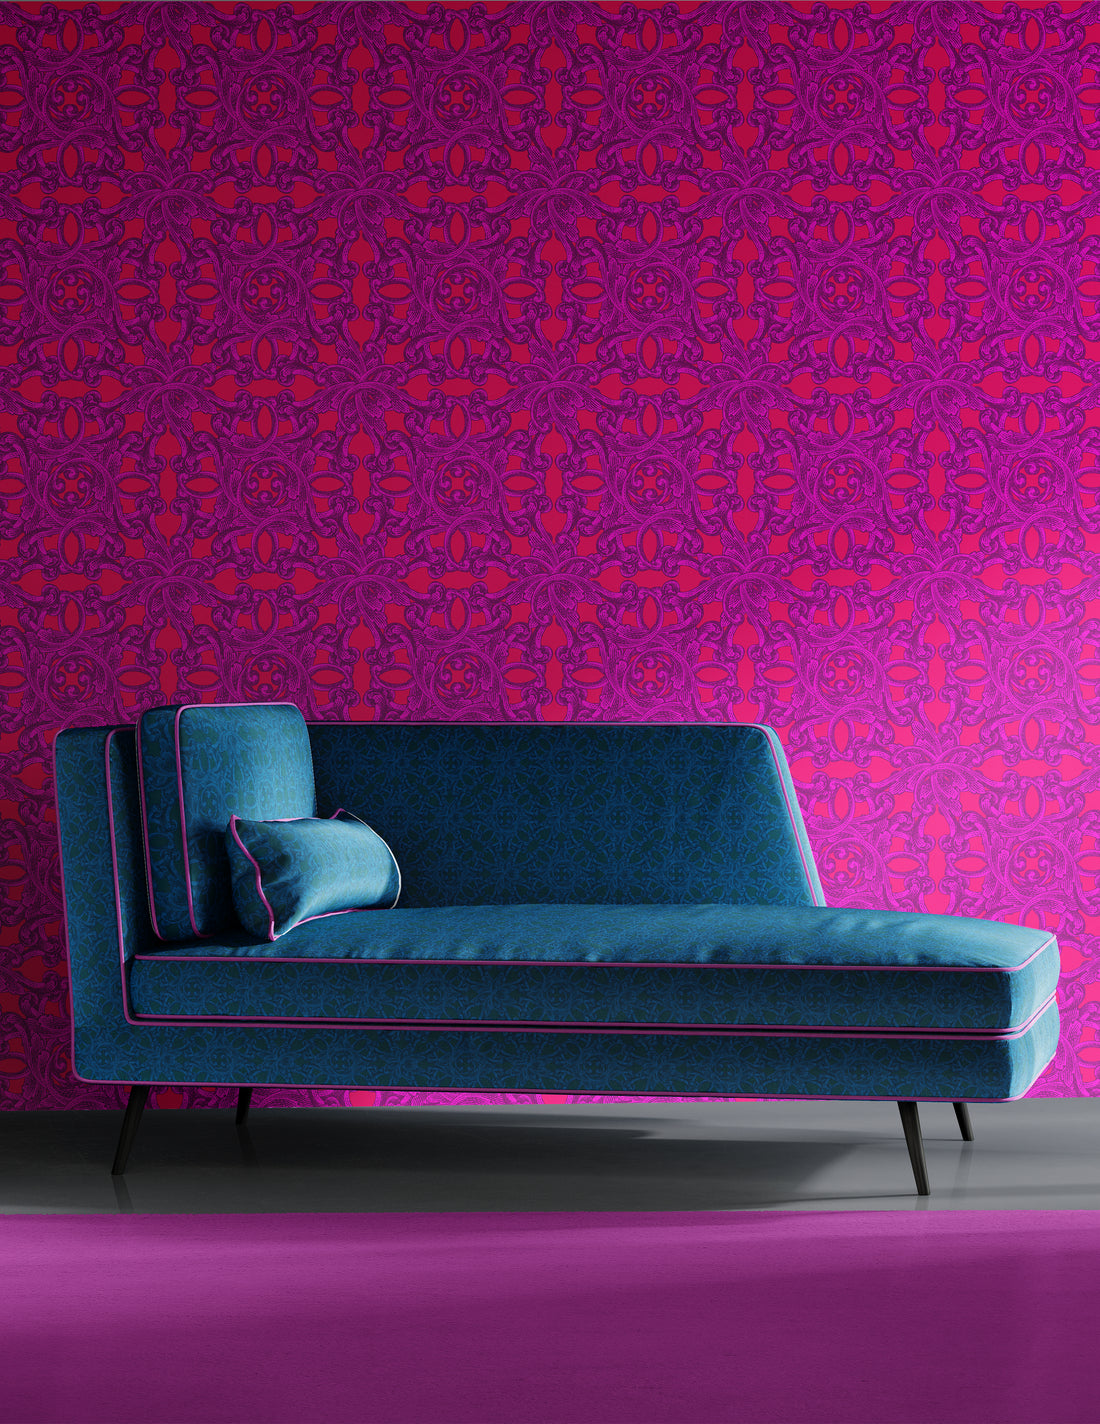 Baroque Wallpaper and Upholstery Fabric, by Studio Ten Design